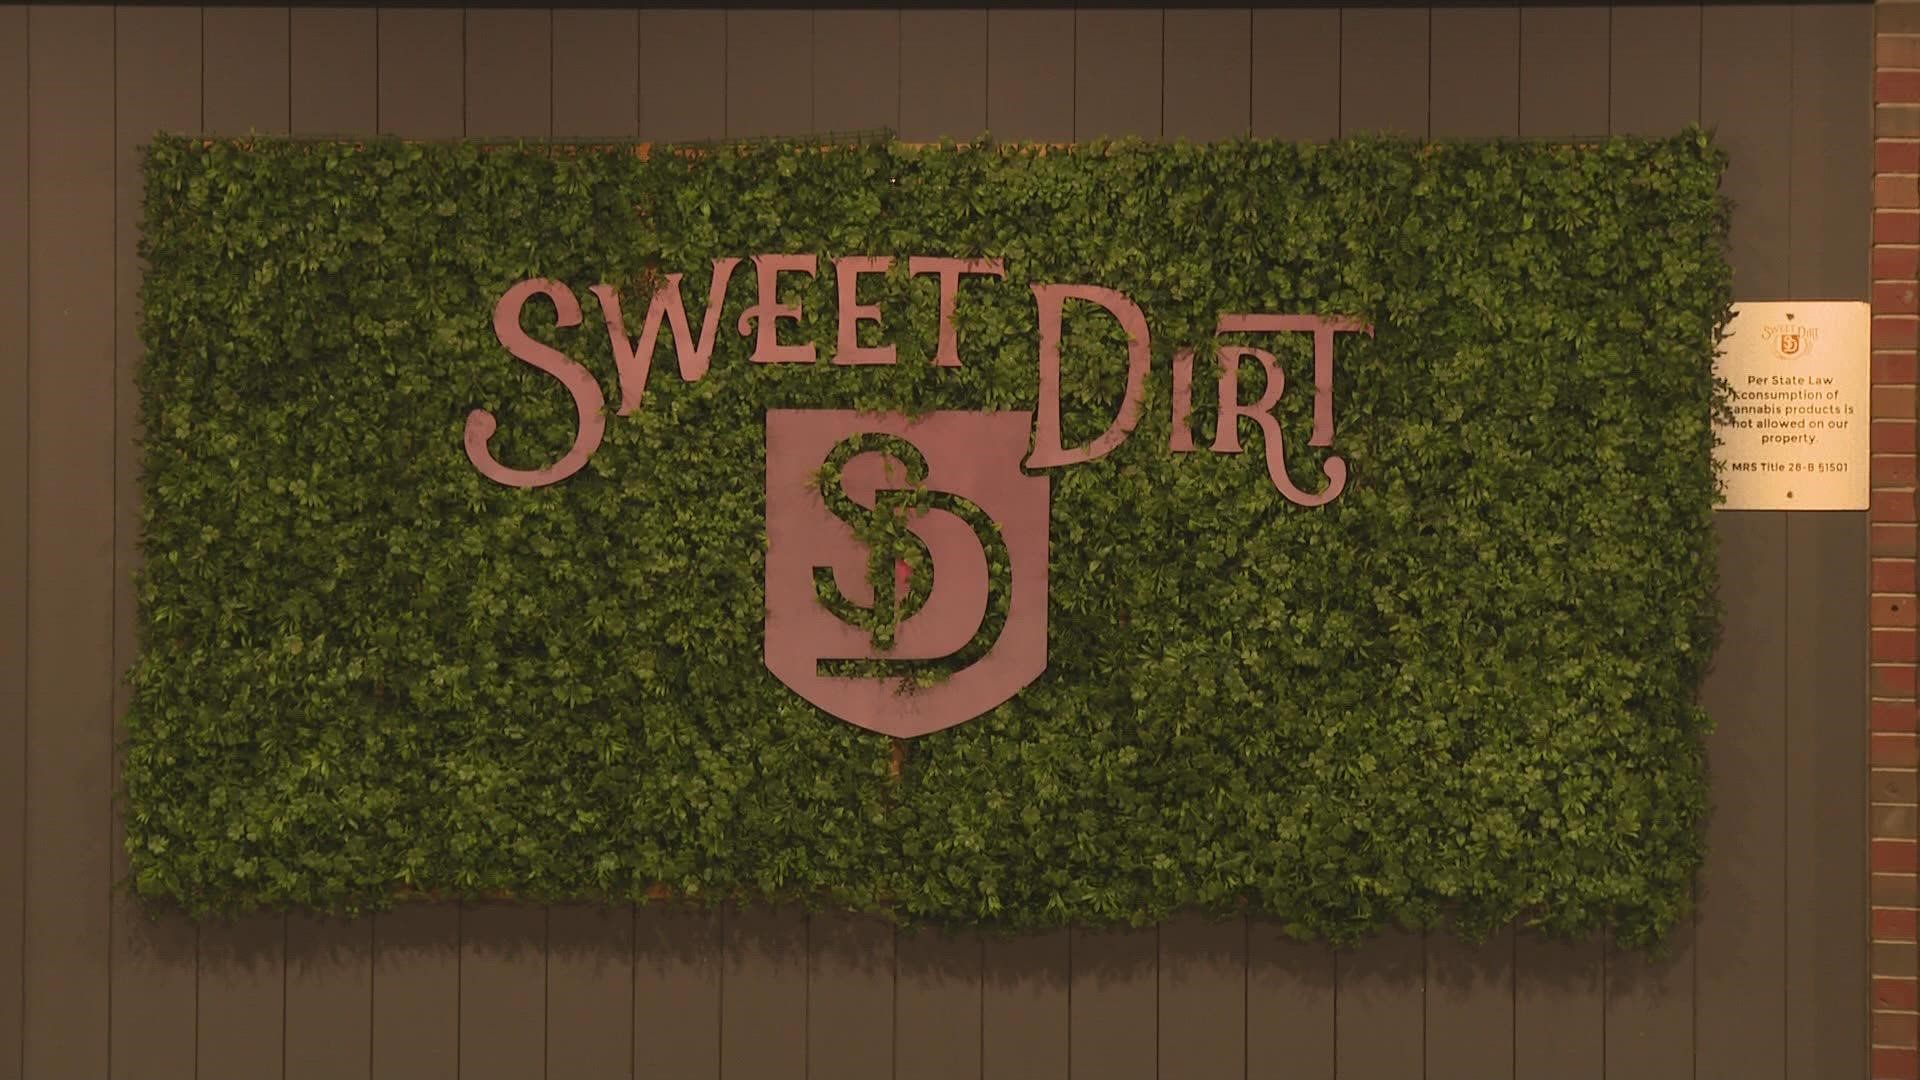 Two people recently broke into Sweet Dirt on Forest Avenue around midnight, according to the company.